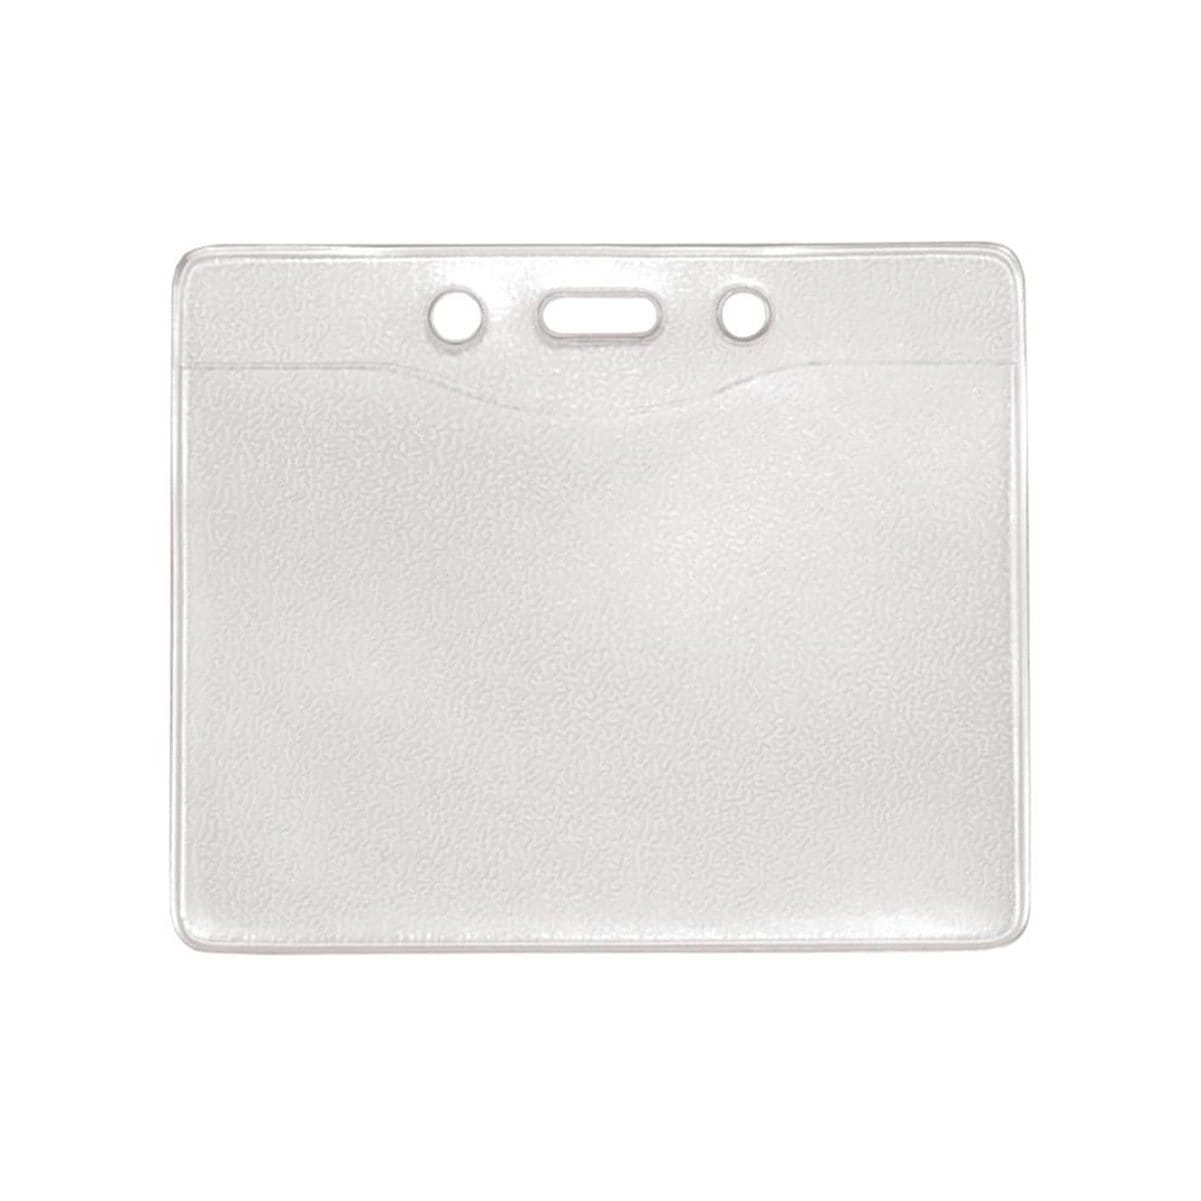 Textured Badge Holder With Slot And Chain Holes (P/N 1815-1000) and more  Clear Vinyl Holders at